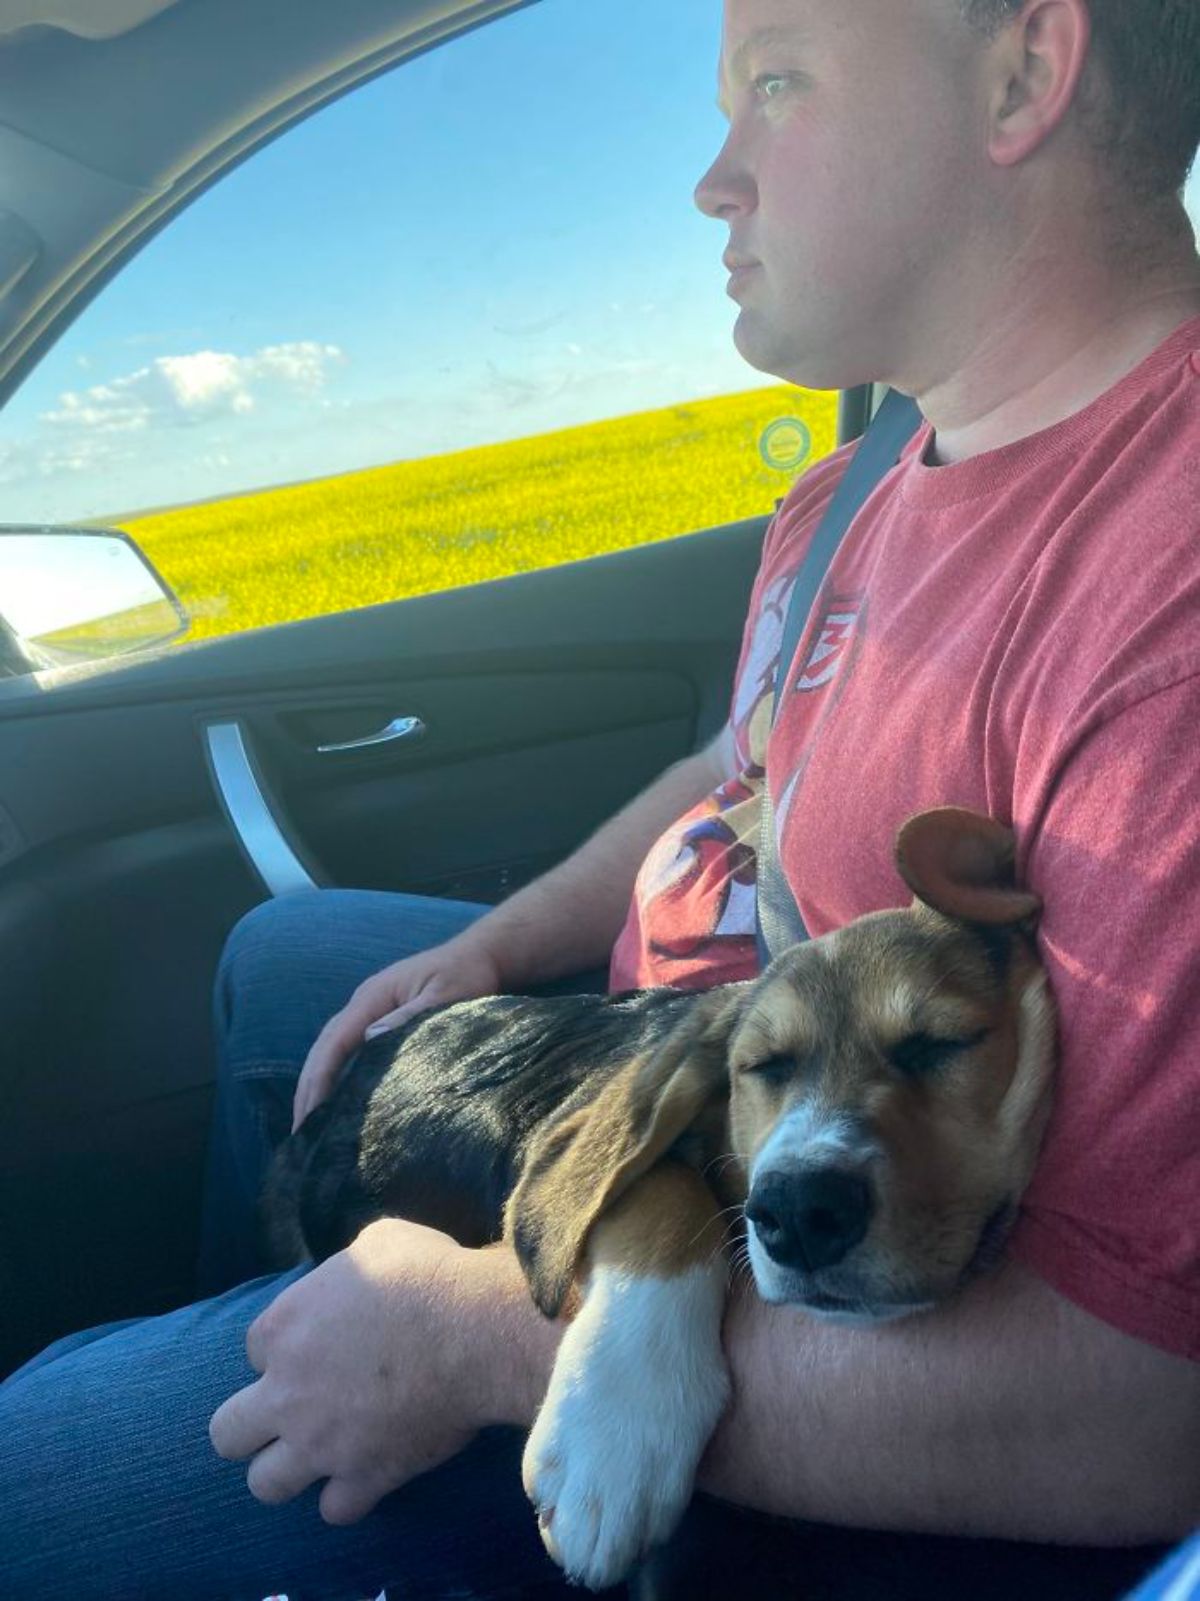 black brown and white dog sleeping on a man's lap inside a vehicle